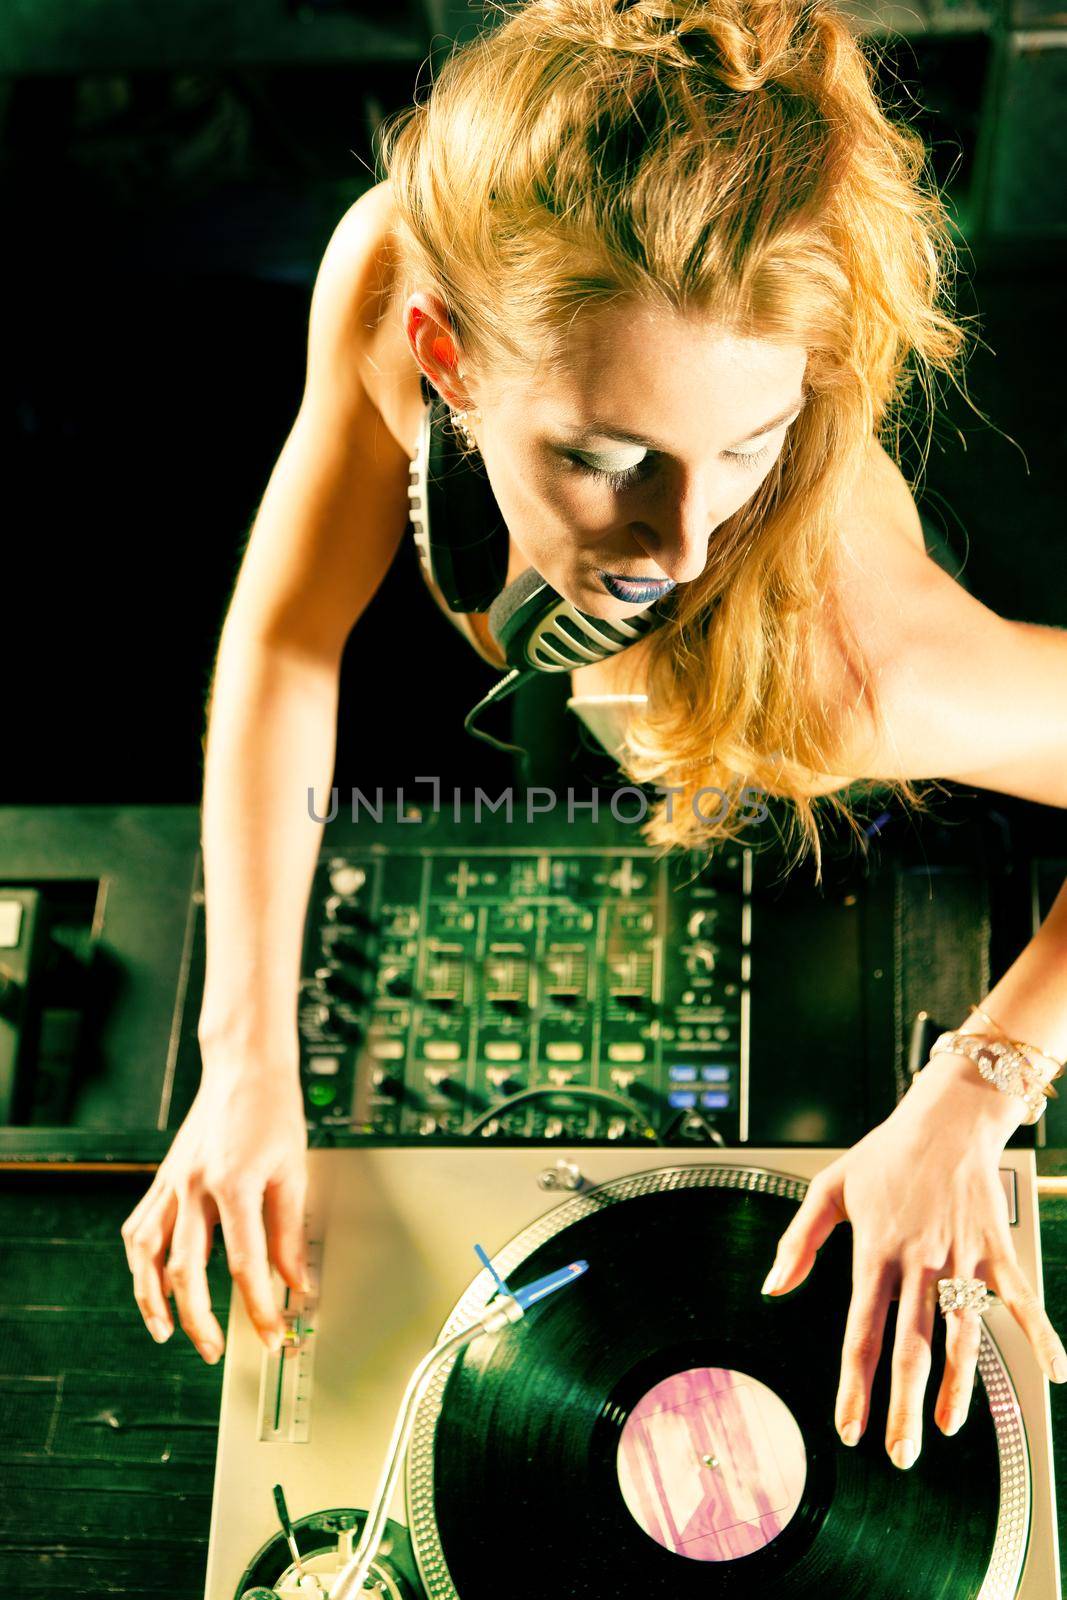 Female DJ at the turntable in Club by Kzenon